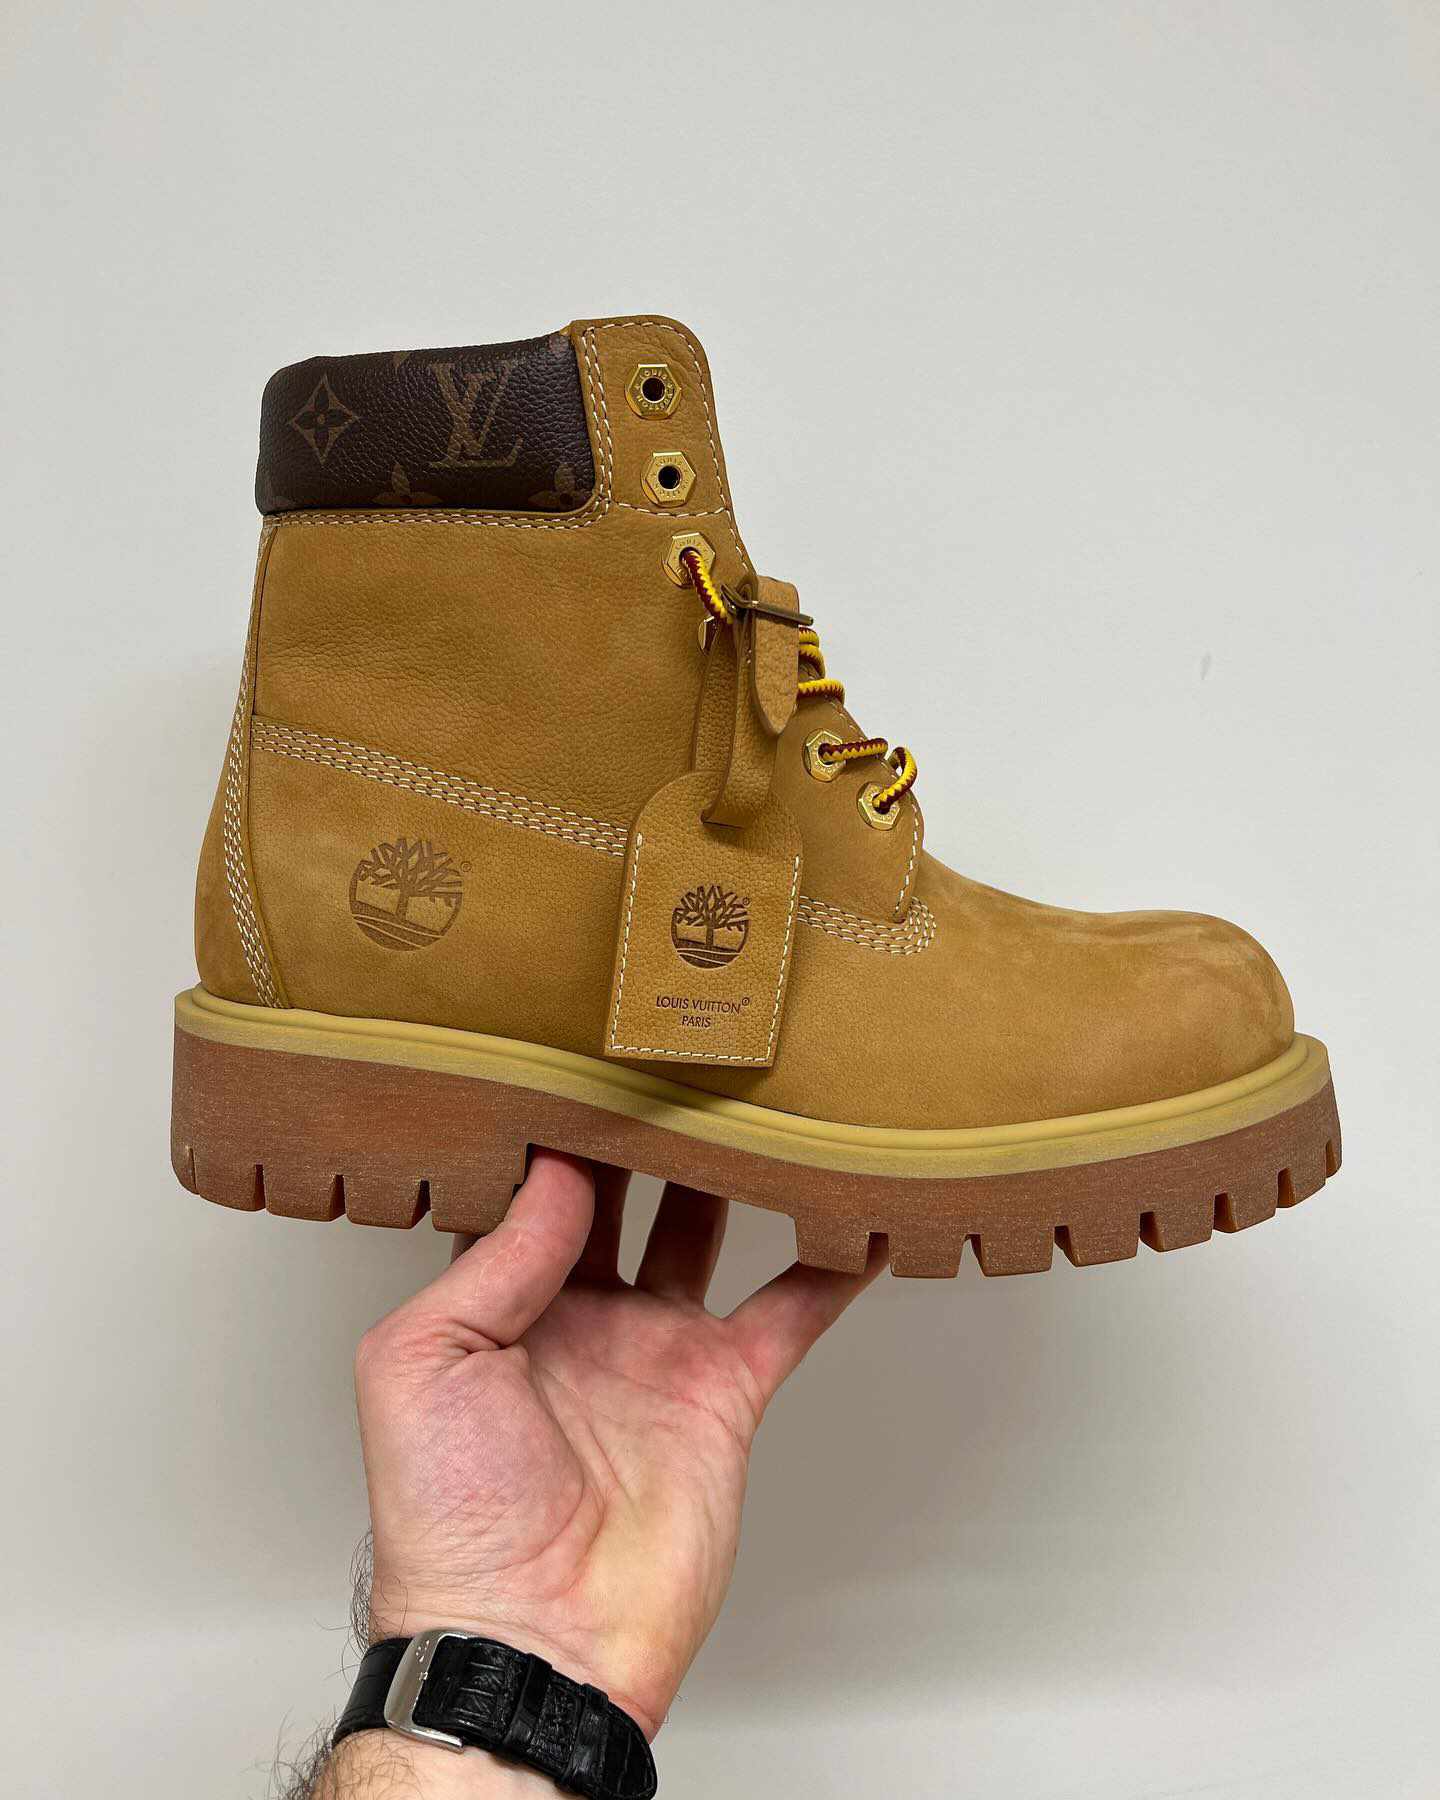 Louis Vuitton's Timberland 6" boot collaboration in wheat leather